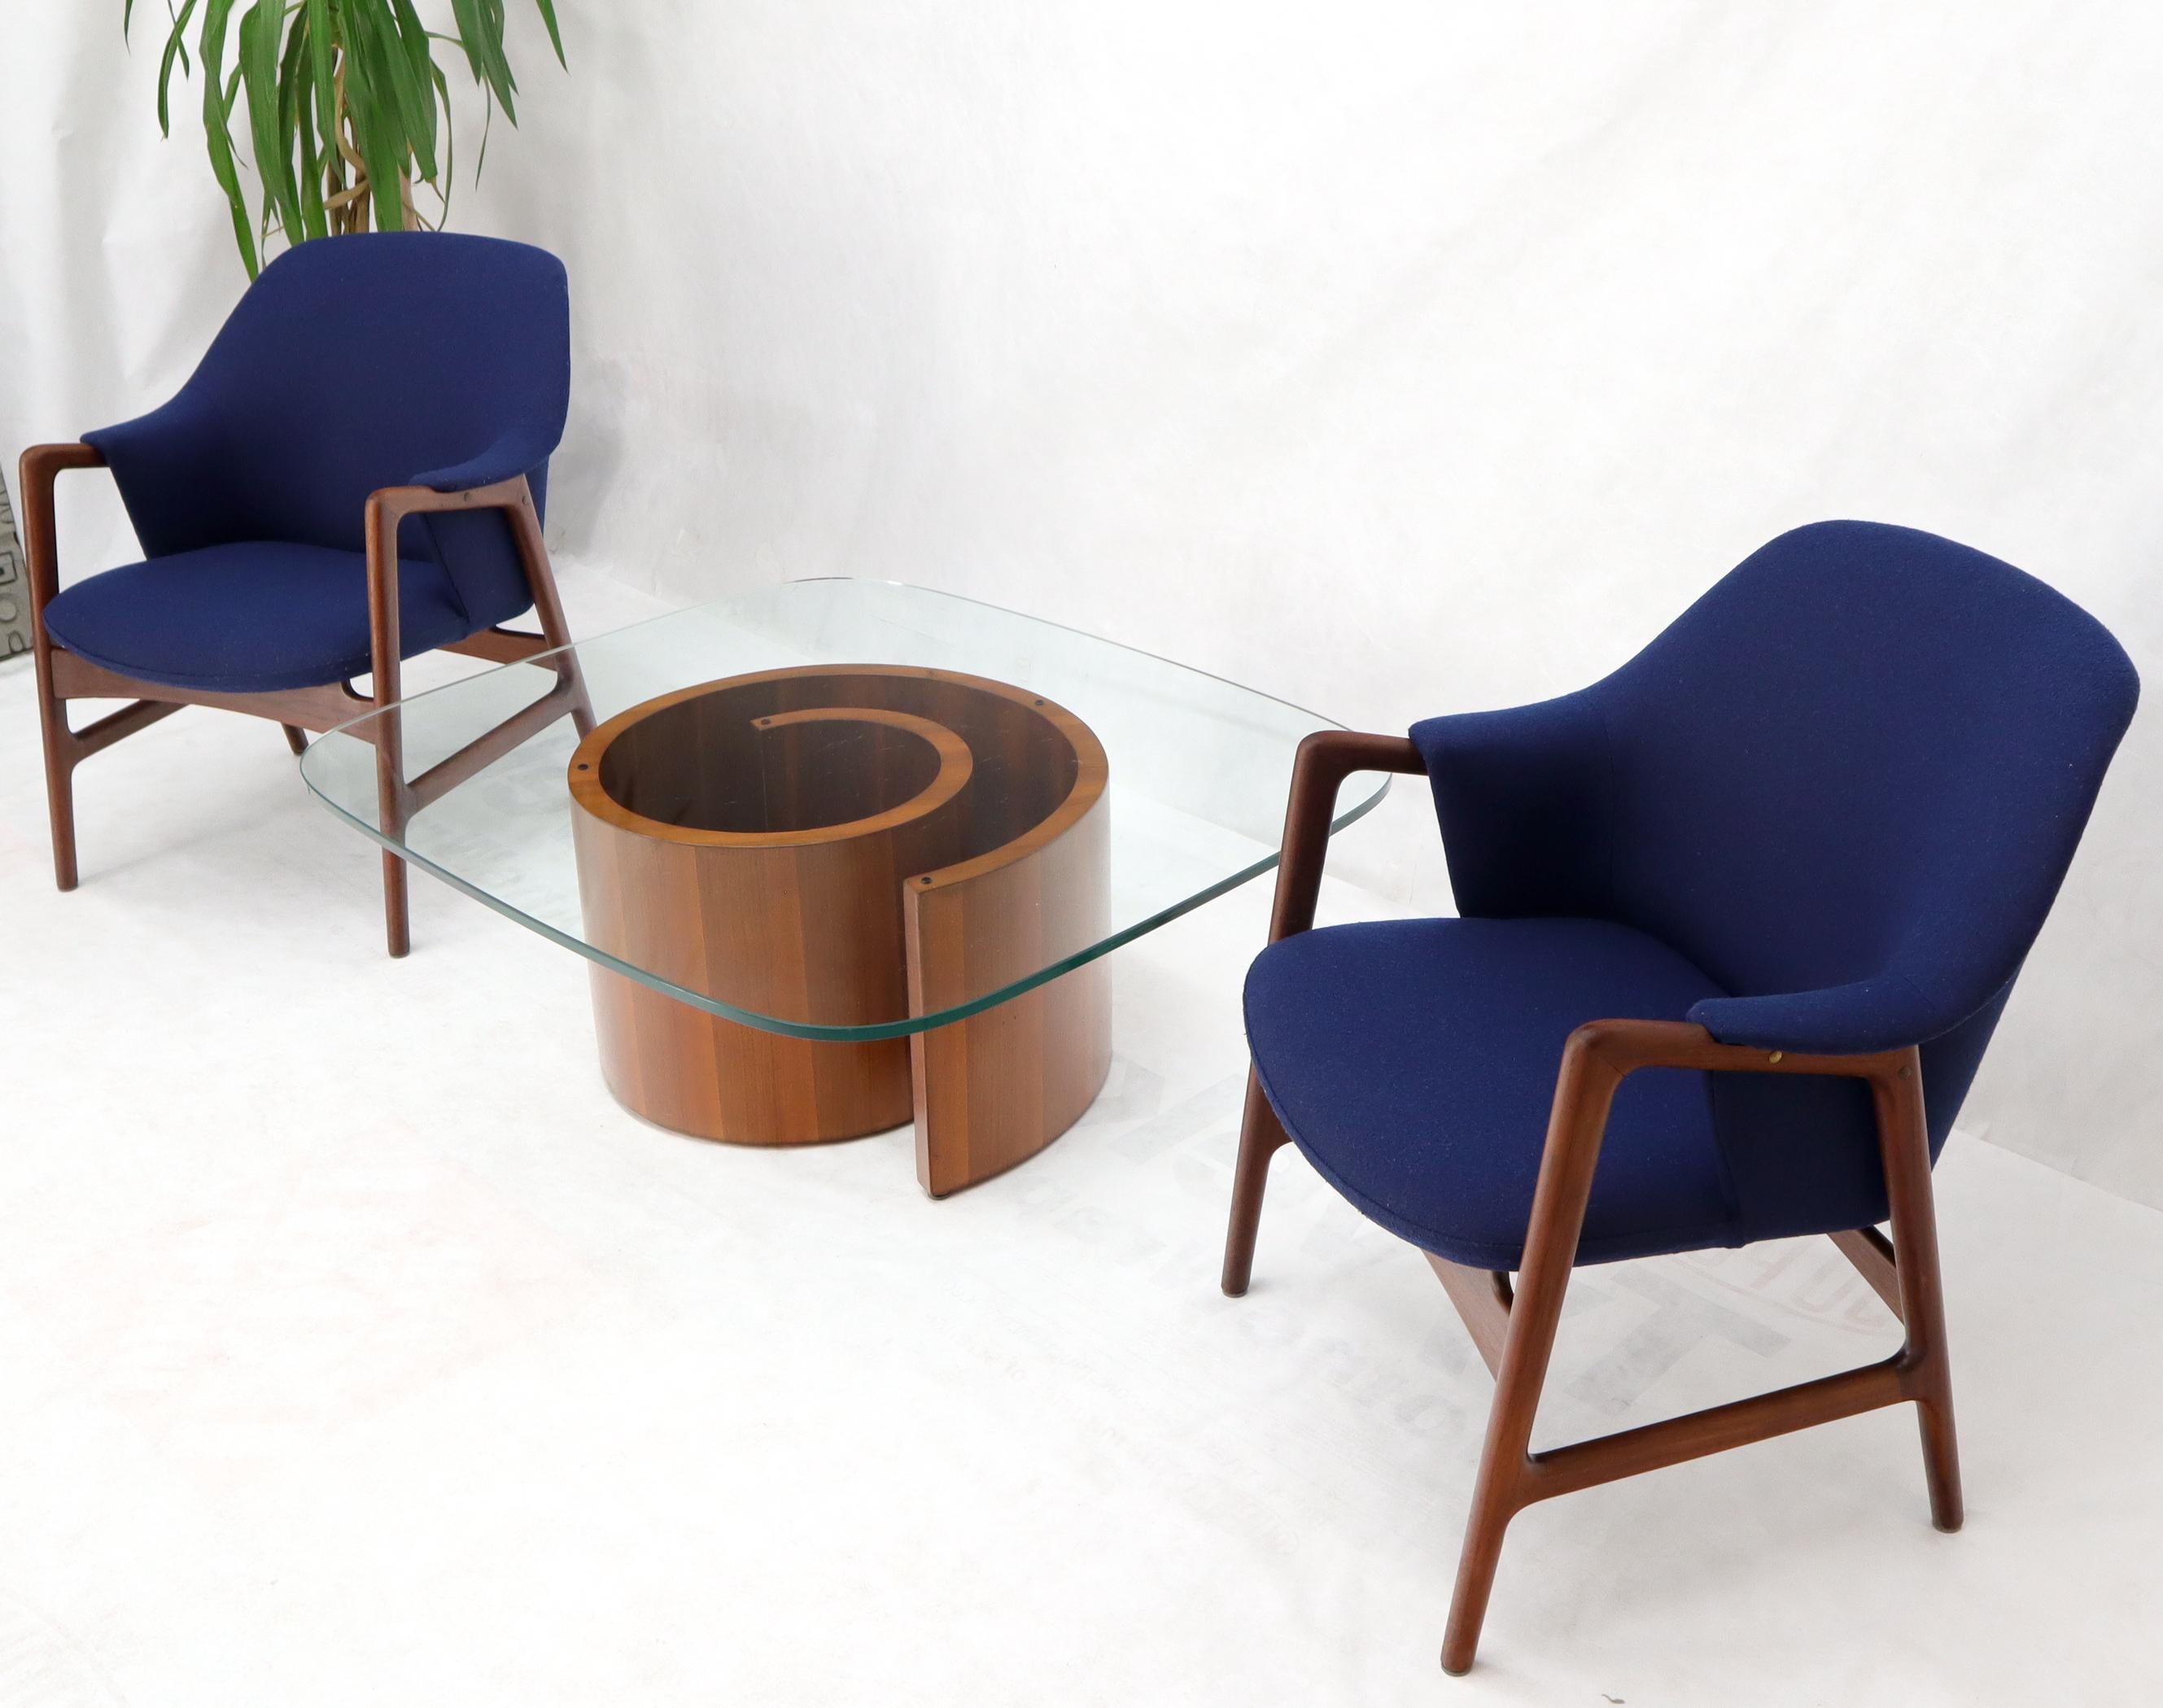 New Blue Wool Upholstery Teak Frames Danish Mid-Century Modern Lounge Chairs For Sale 6